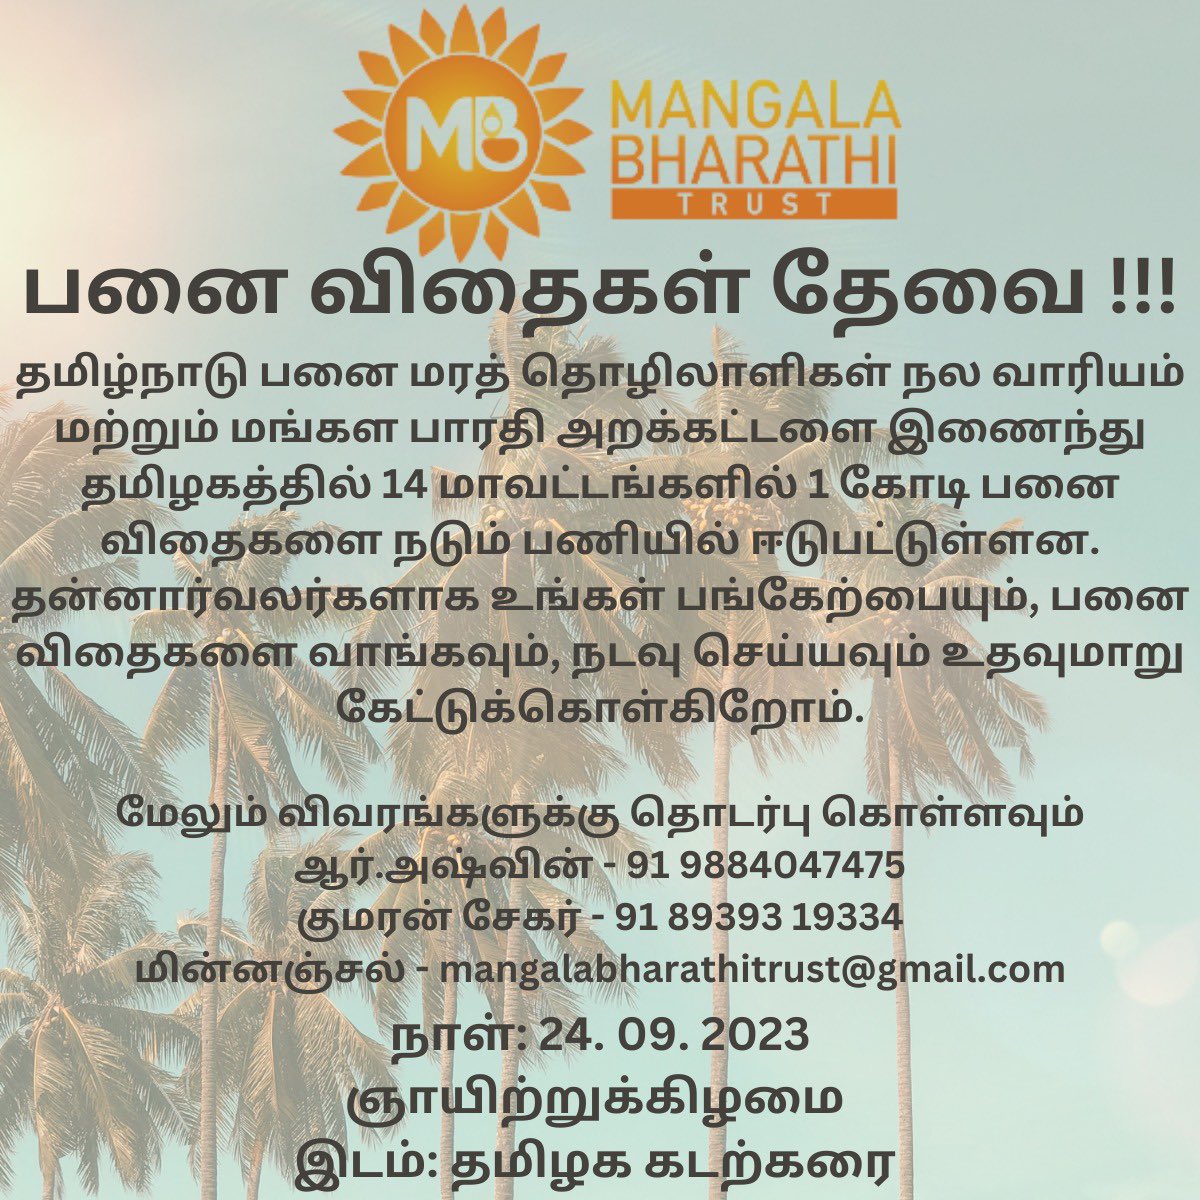 #HELP Tamil Nadu Palm tree workers welfare board & Mangala Bharathi trust are working together to plant 1 CRORE PALM seeds in Tamil Nadu in 14 different districs. They’re in need of volunteers, also help them procure & plant palm seeds. 24.09.2023 TamilNadu Beach. RT pls.